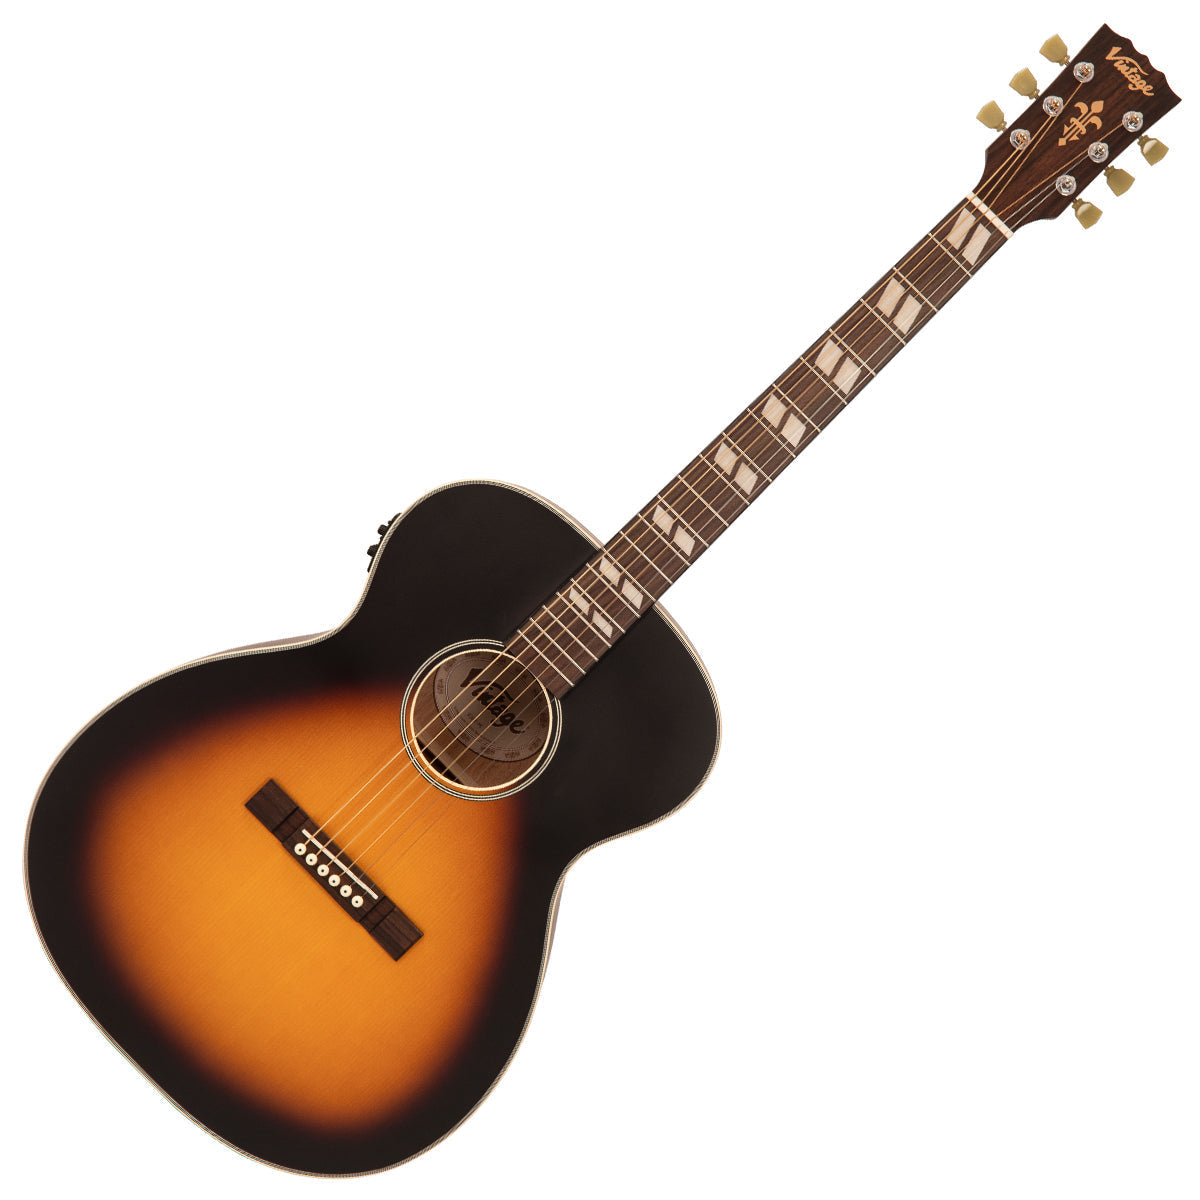 Vintage Historic Series 'Orchestra' Electro-Acoustic Guitar ~ Vintage Sunburst, Electric Acoustic Guitars for sale at Richards Guitars.